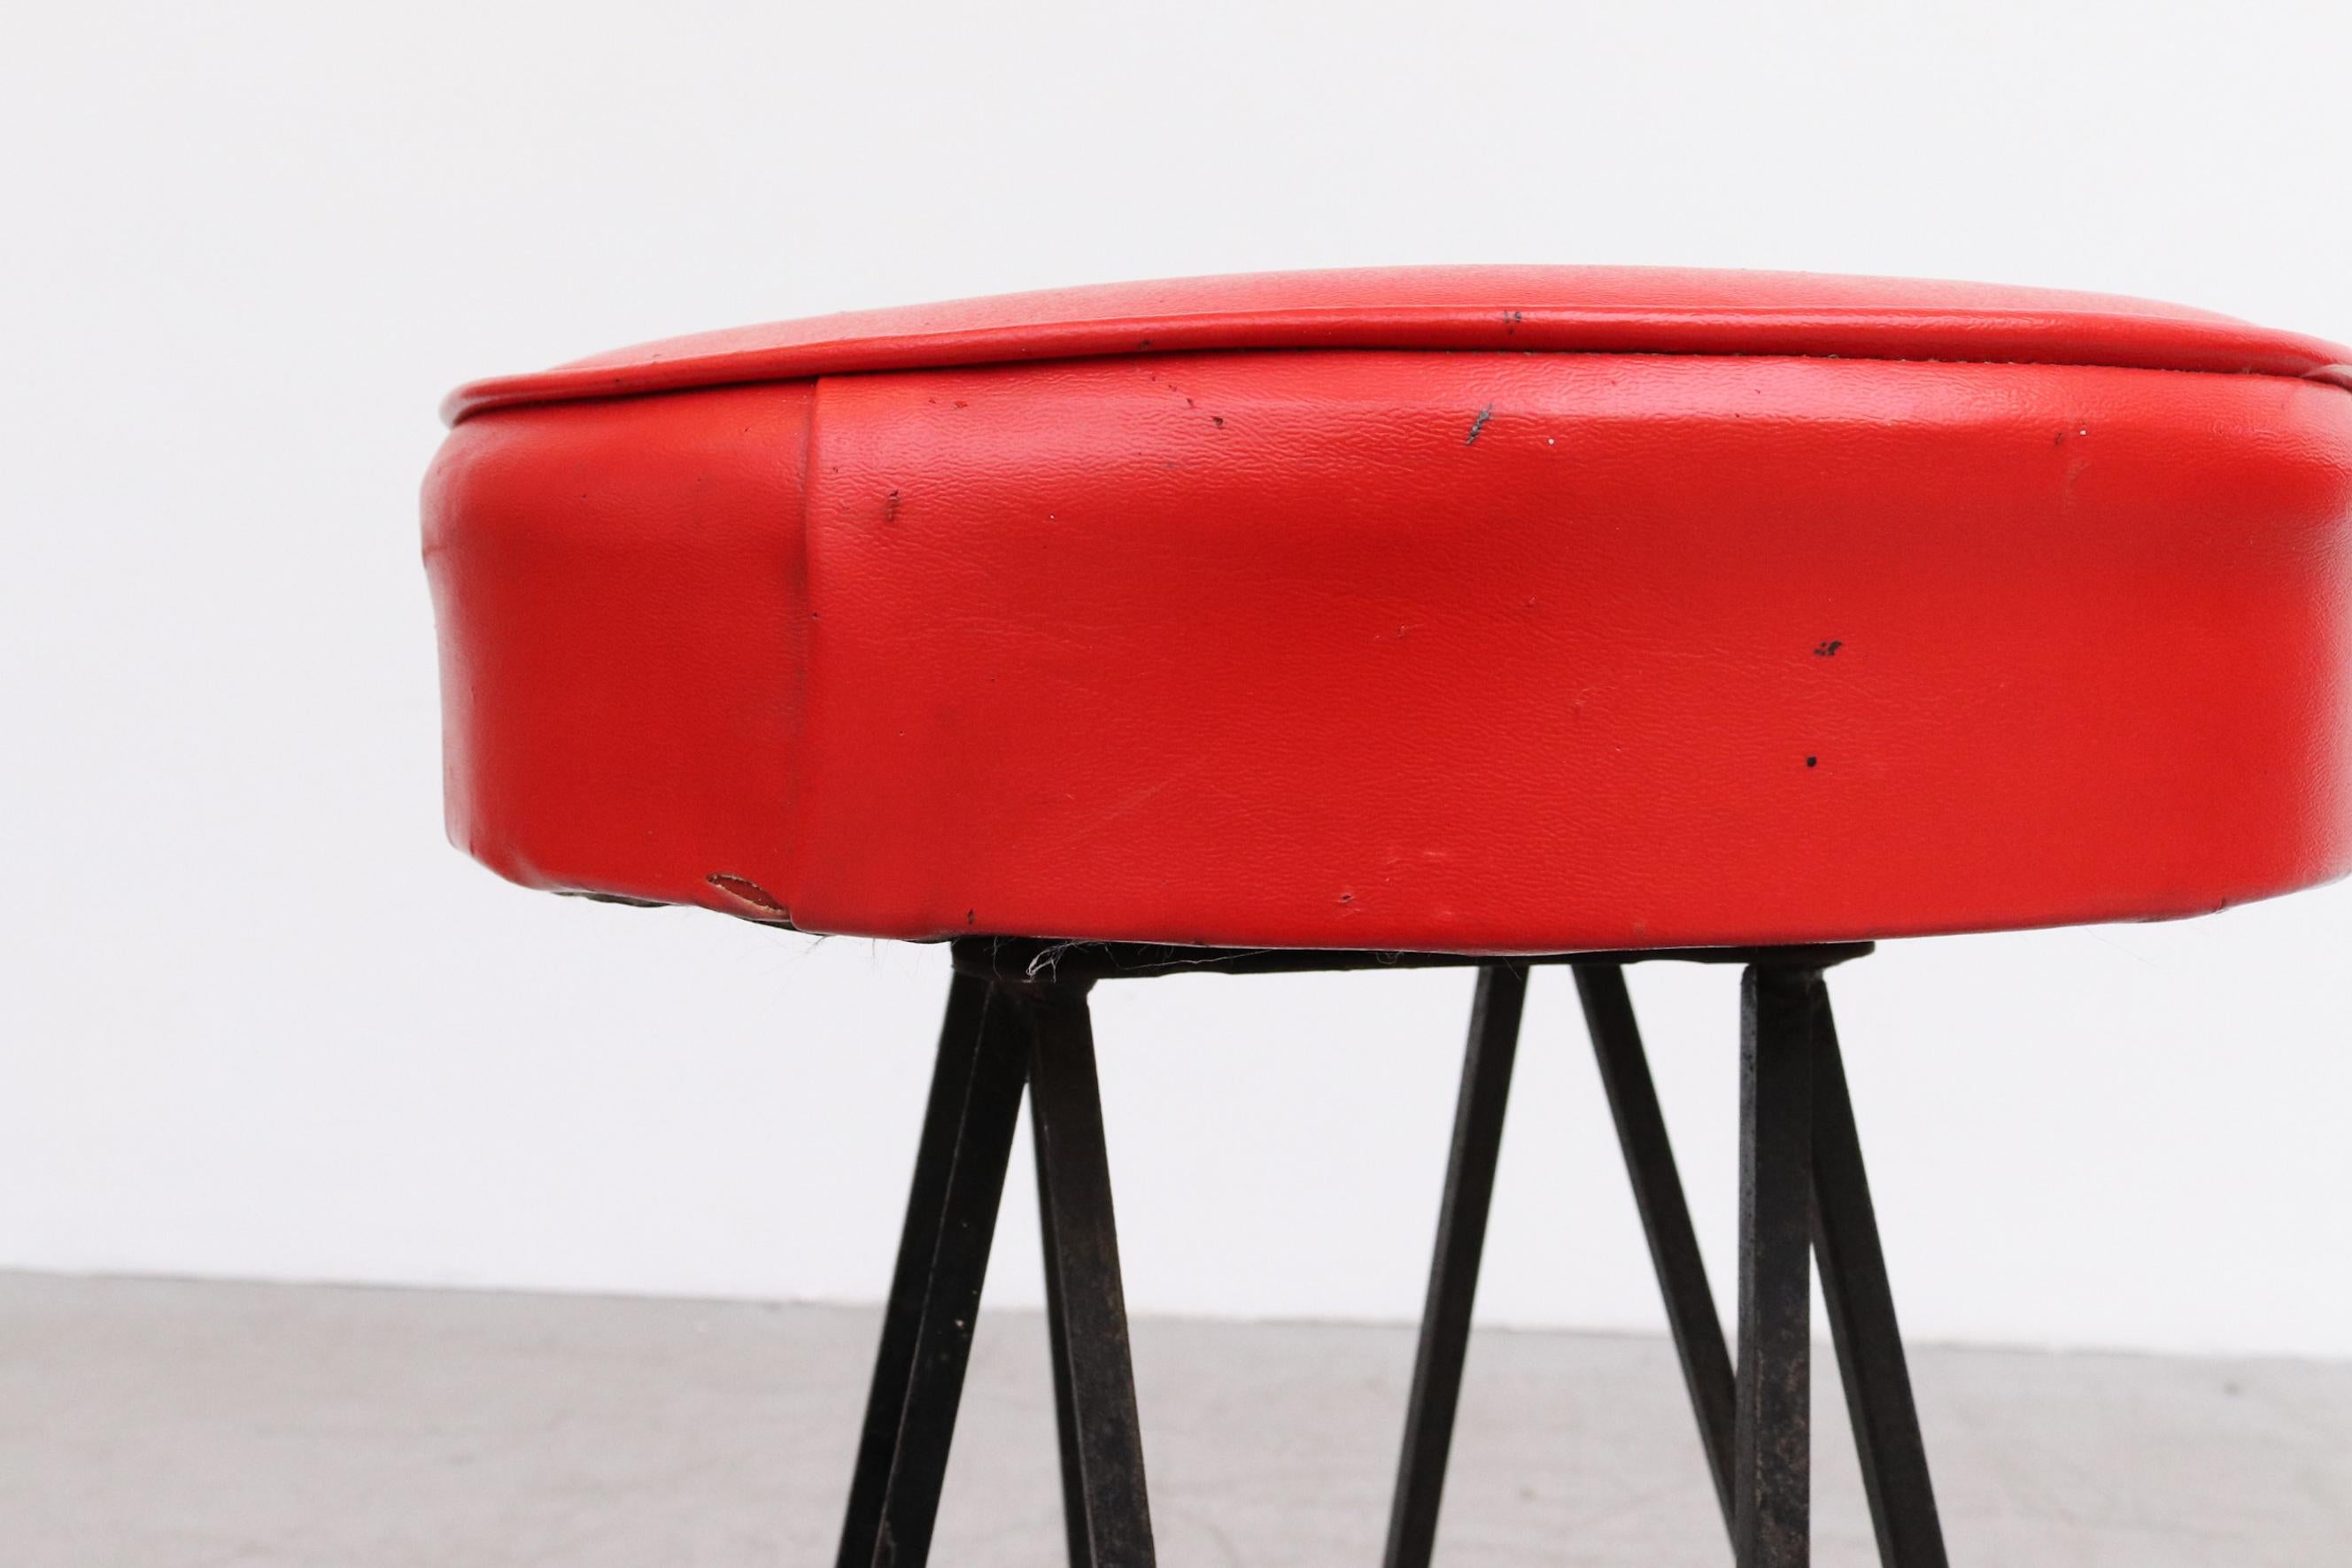 Pair of Retro 50's Red Skai Bar Stools For Sale at 1stDibs